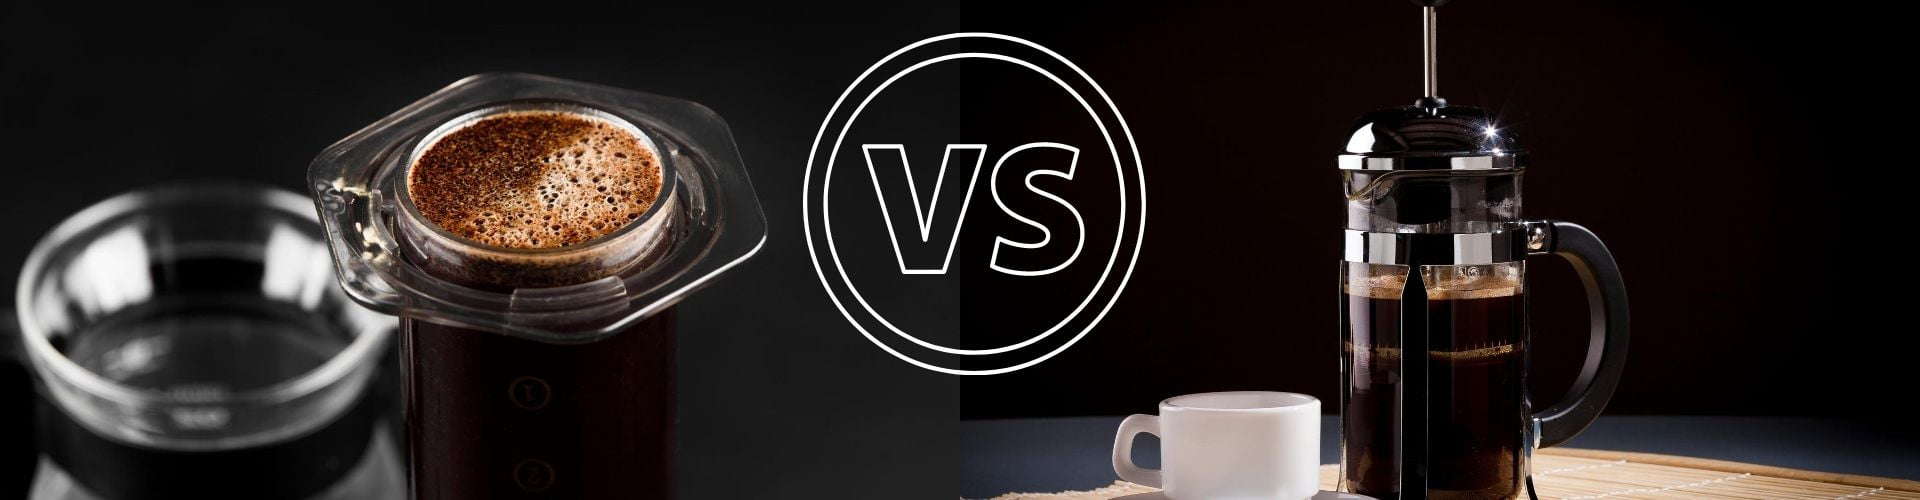 Aeropress Vs French Press: Which Manual Coffee Maker Makes The Best Coffee?